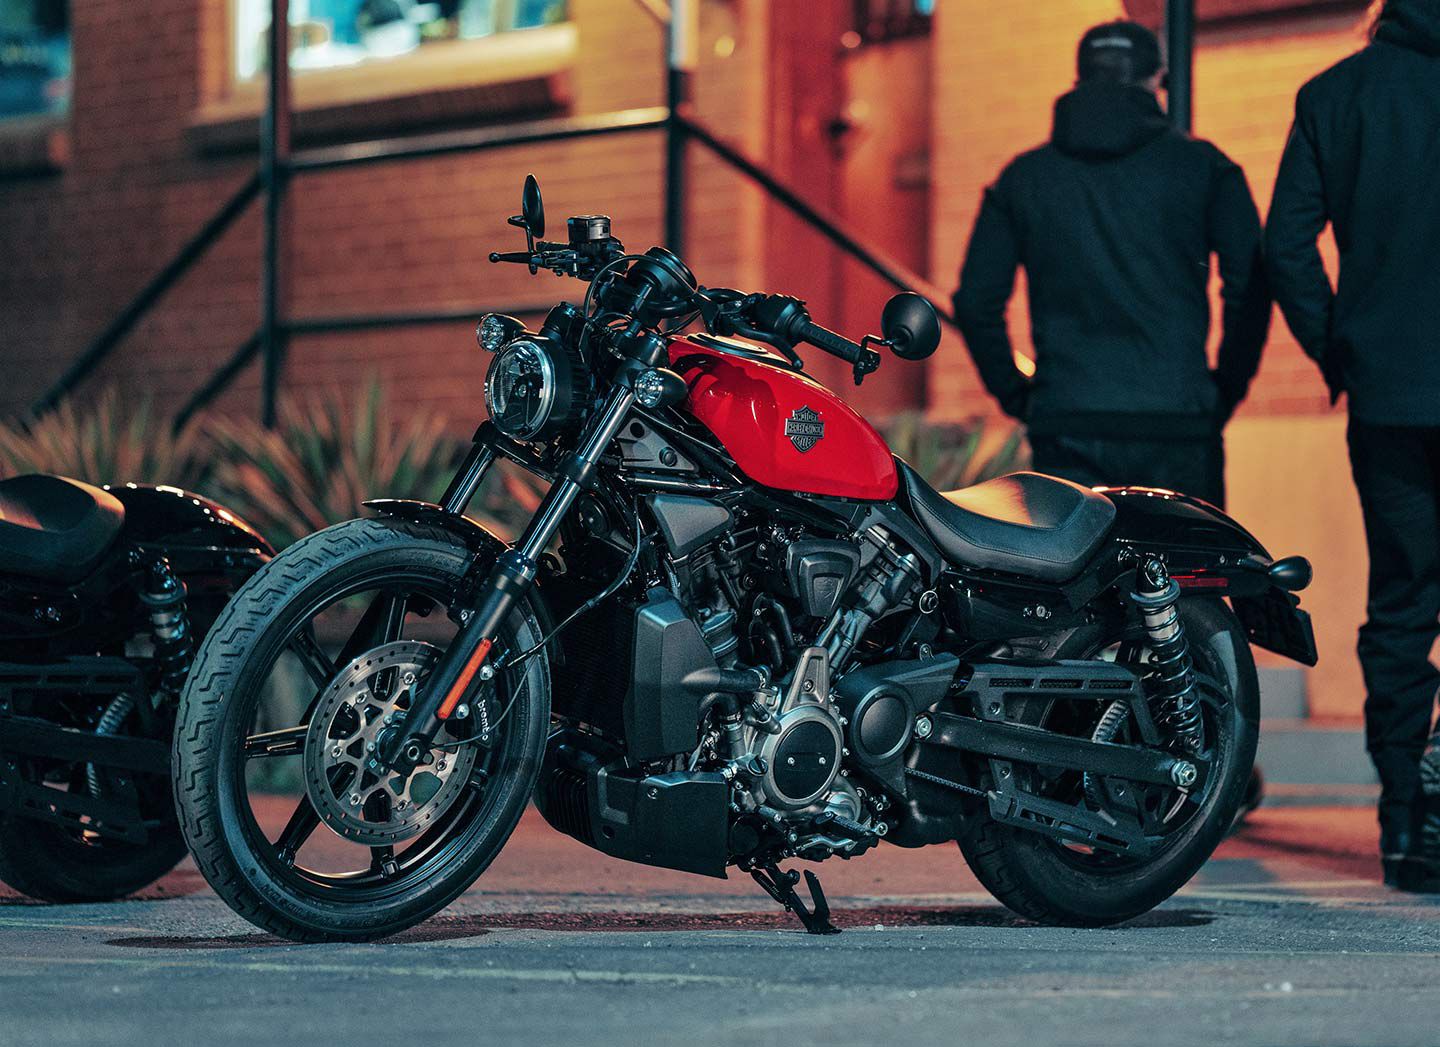 Harley’s Nightster brings nimble handling, a low seat, and a healthy power output from the liquid-cooled engine.